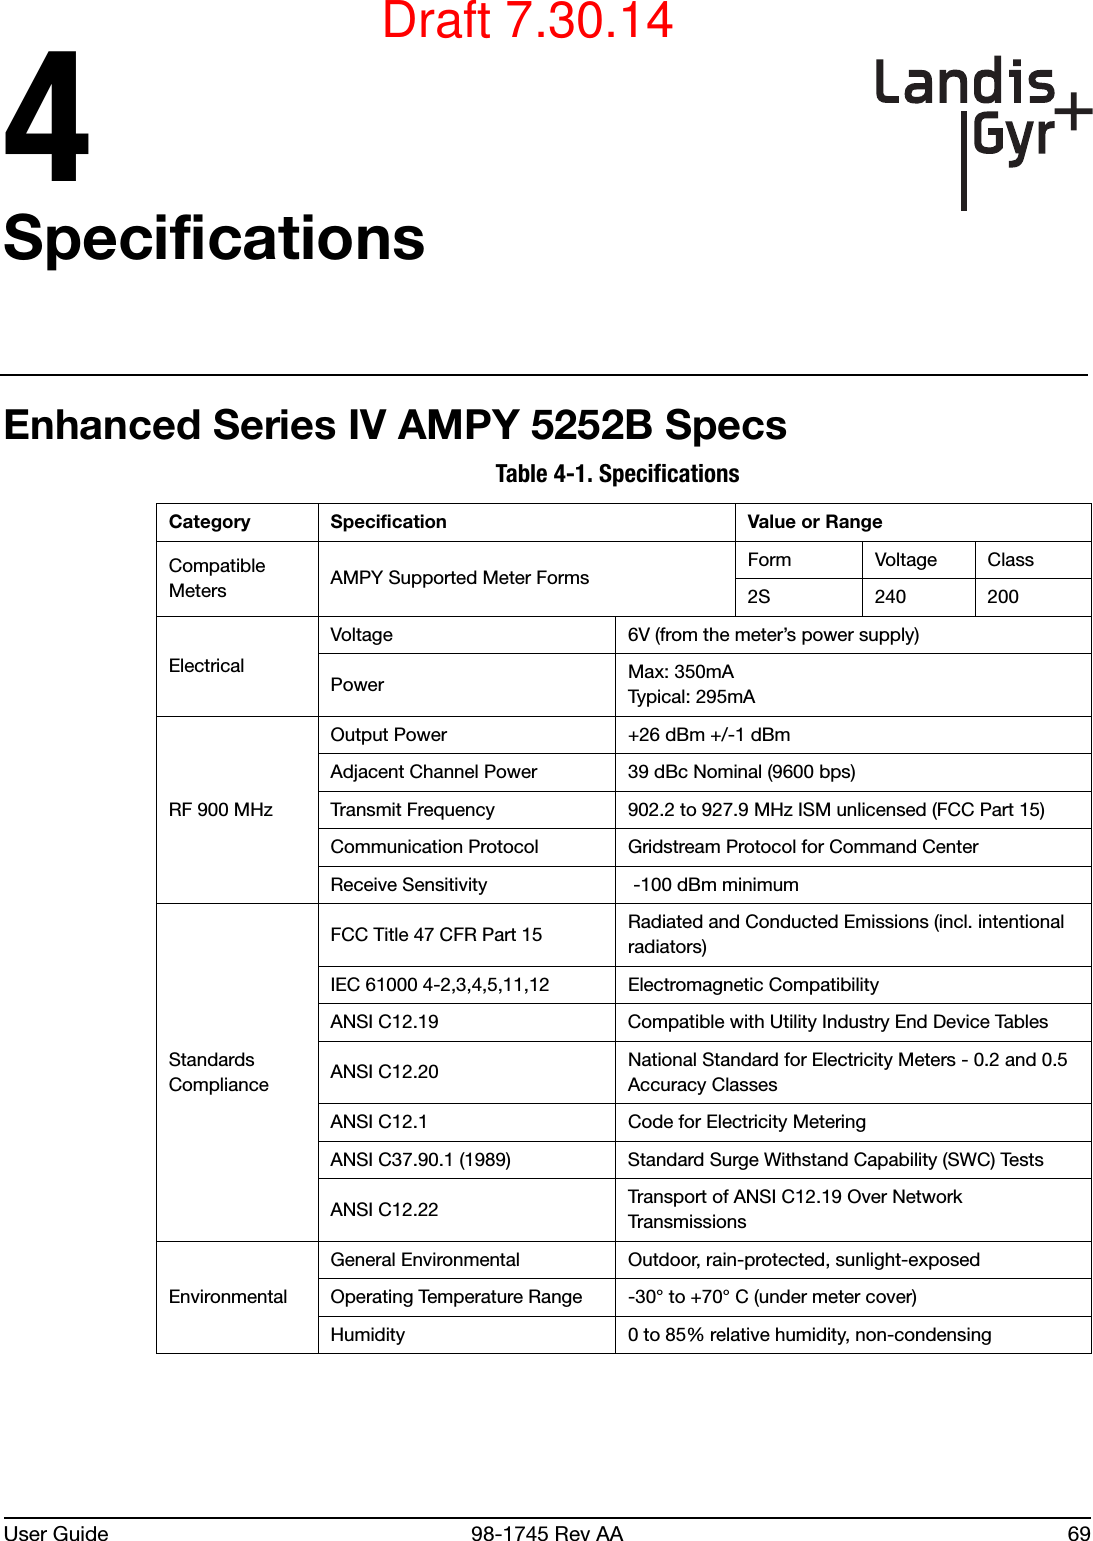 User Guide 98-1745 Rev AA 694SpecificationsEnhanced Series IV AMPY 5252B SpecsTable 4-1. Specifications Category Specification Value or RangeCompatible Meters AMPY Supported Meter FormsForm Voltage Class2S 240 200ElectricalVoltage 6V (from the meter’s power supply)Power Max: 350mATypical: 295mARF 900 MHzOutput Power +26 dBm +/-1 dBmAdjacent Channel Power 39 dBc Nominal (9600 bps)Transmit Frequency 902.2 to 927.9 MHz ISM unlicensed (FCC Part 15)Communication Protocol Gridstream Protocol for Command CenterReceive Sensitivity  -100 dBm minimumStandards ComplianceFCC Title 47 CFR Part 15 Radiated and Conducted Emissions (incl. intentional radiators)IEC 61000 4-2,3,4,5,11,12 Electromagnetic CompatibilityANSI C12.19 Compatible with Utility Industry End Device TablesANSI C12.20 National Standard for Electricity Meters - 0.2 and 0.5 Accuracy ClassesANSI C12.1 Code for Electricity Metering ANSI C37.90.1 (1989) Standard Surge Withstand Capability (SWC) TestsANSI C12.22 Transport of ANSI C12.19 Over Network TransmissionsEnvironmentalGeneral Environmental Outdoor, rain-protected, sunlight-exposedOperating Temperature Range -30° to +70° C (under meter cover)Humidity 0 to 85% relative humidity, non-condensingDraft 7.30.14